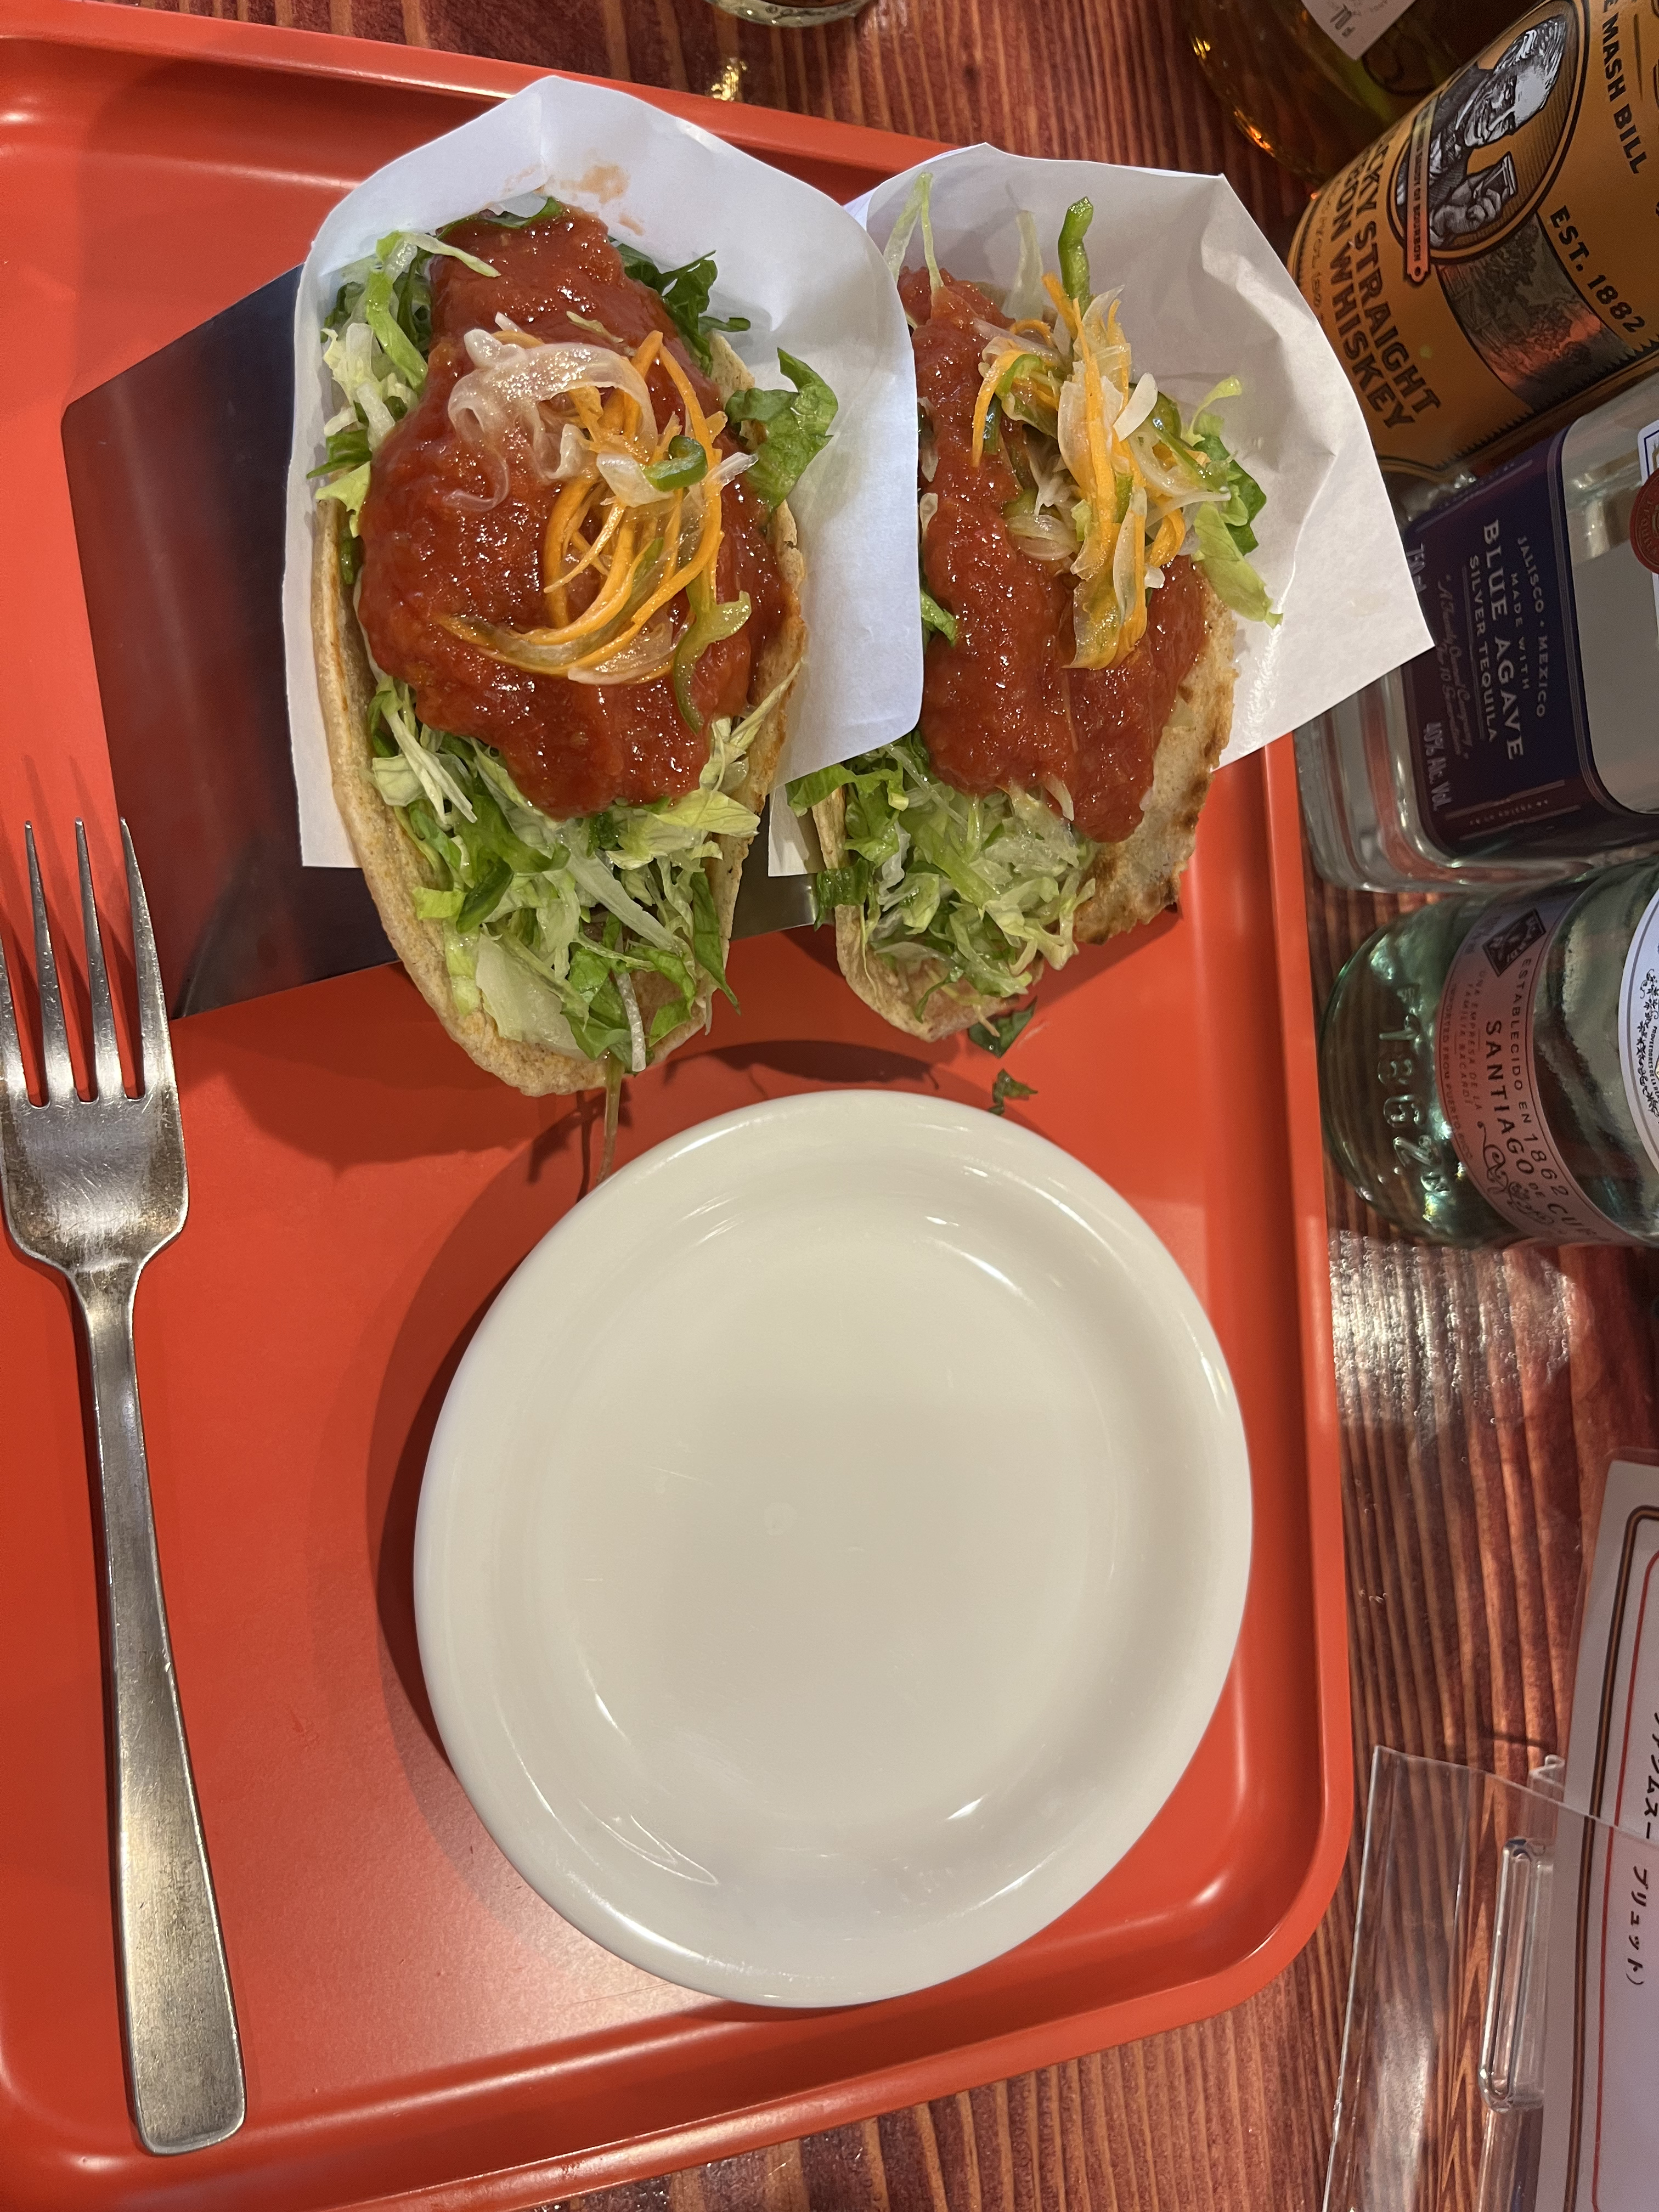 Journey Abroad #6a: First time having Tacos in Japan